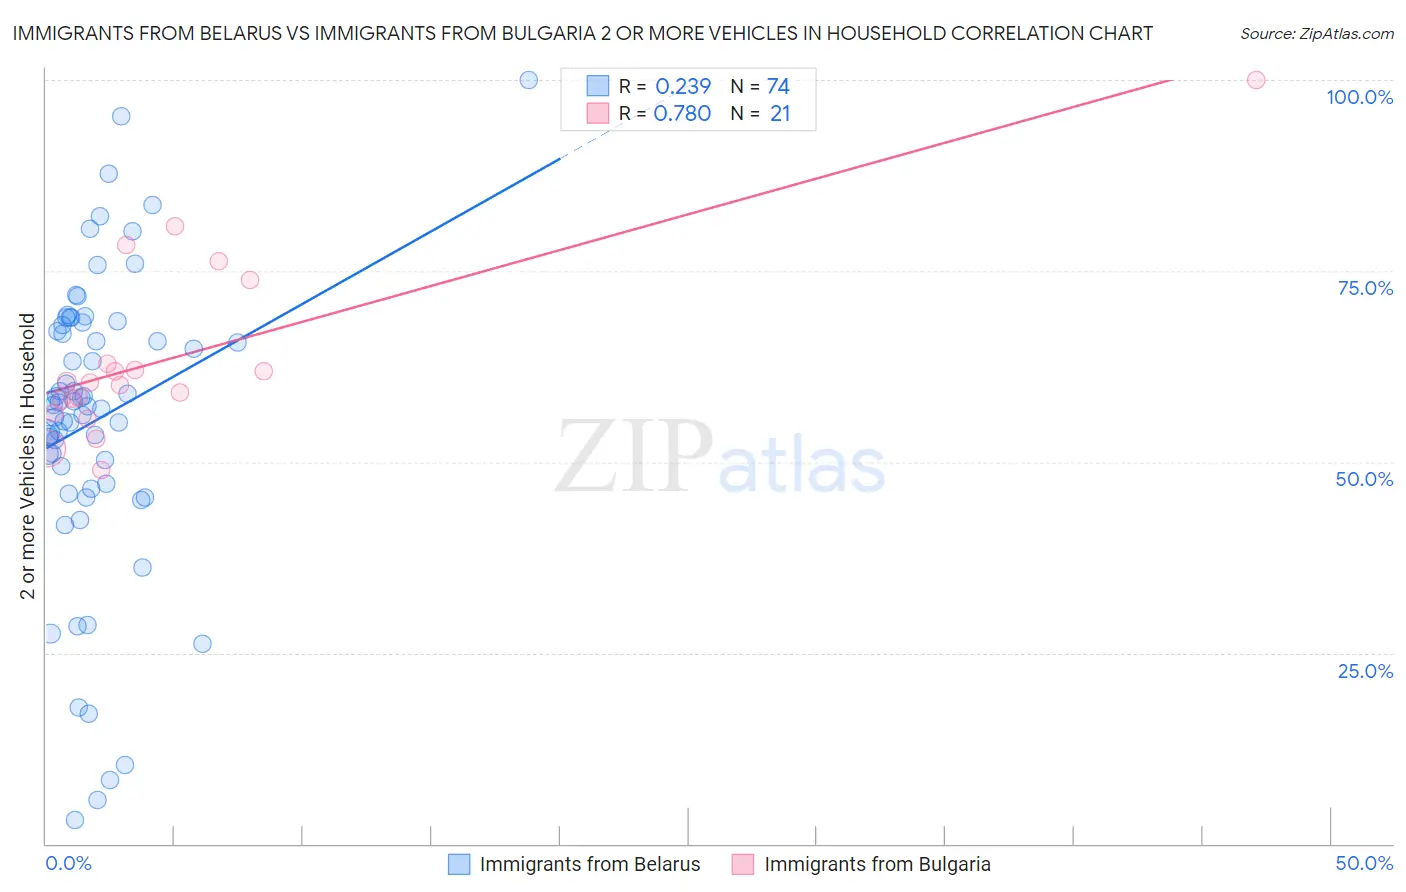 Immigrants from Belarus vs Immigrants from Bulgaria 2 or more Vehicles in Household